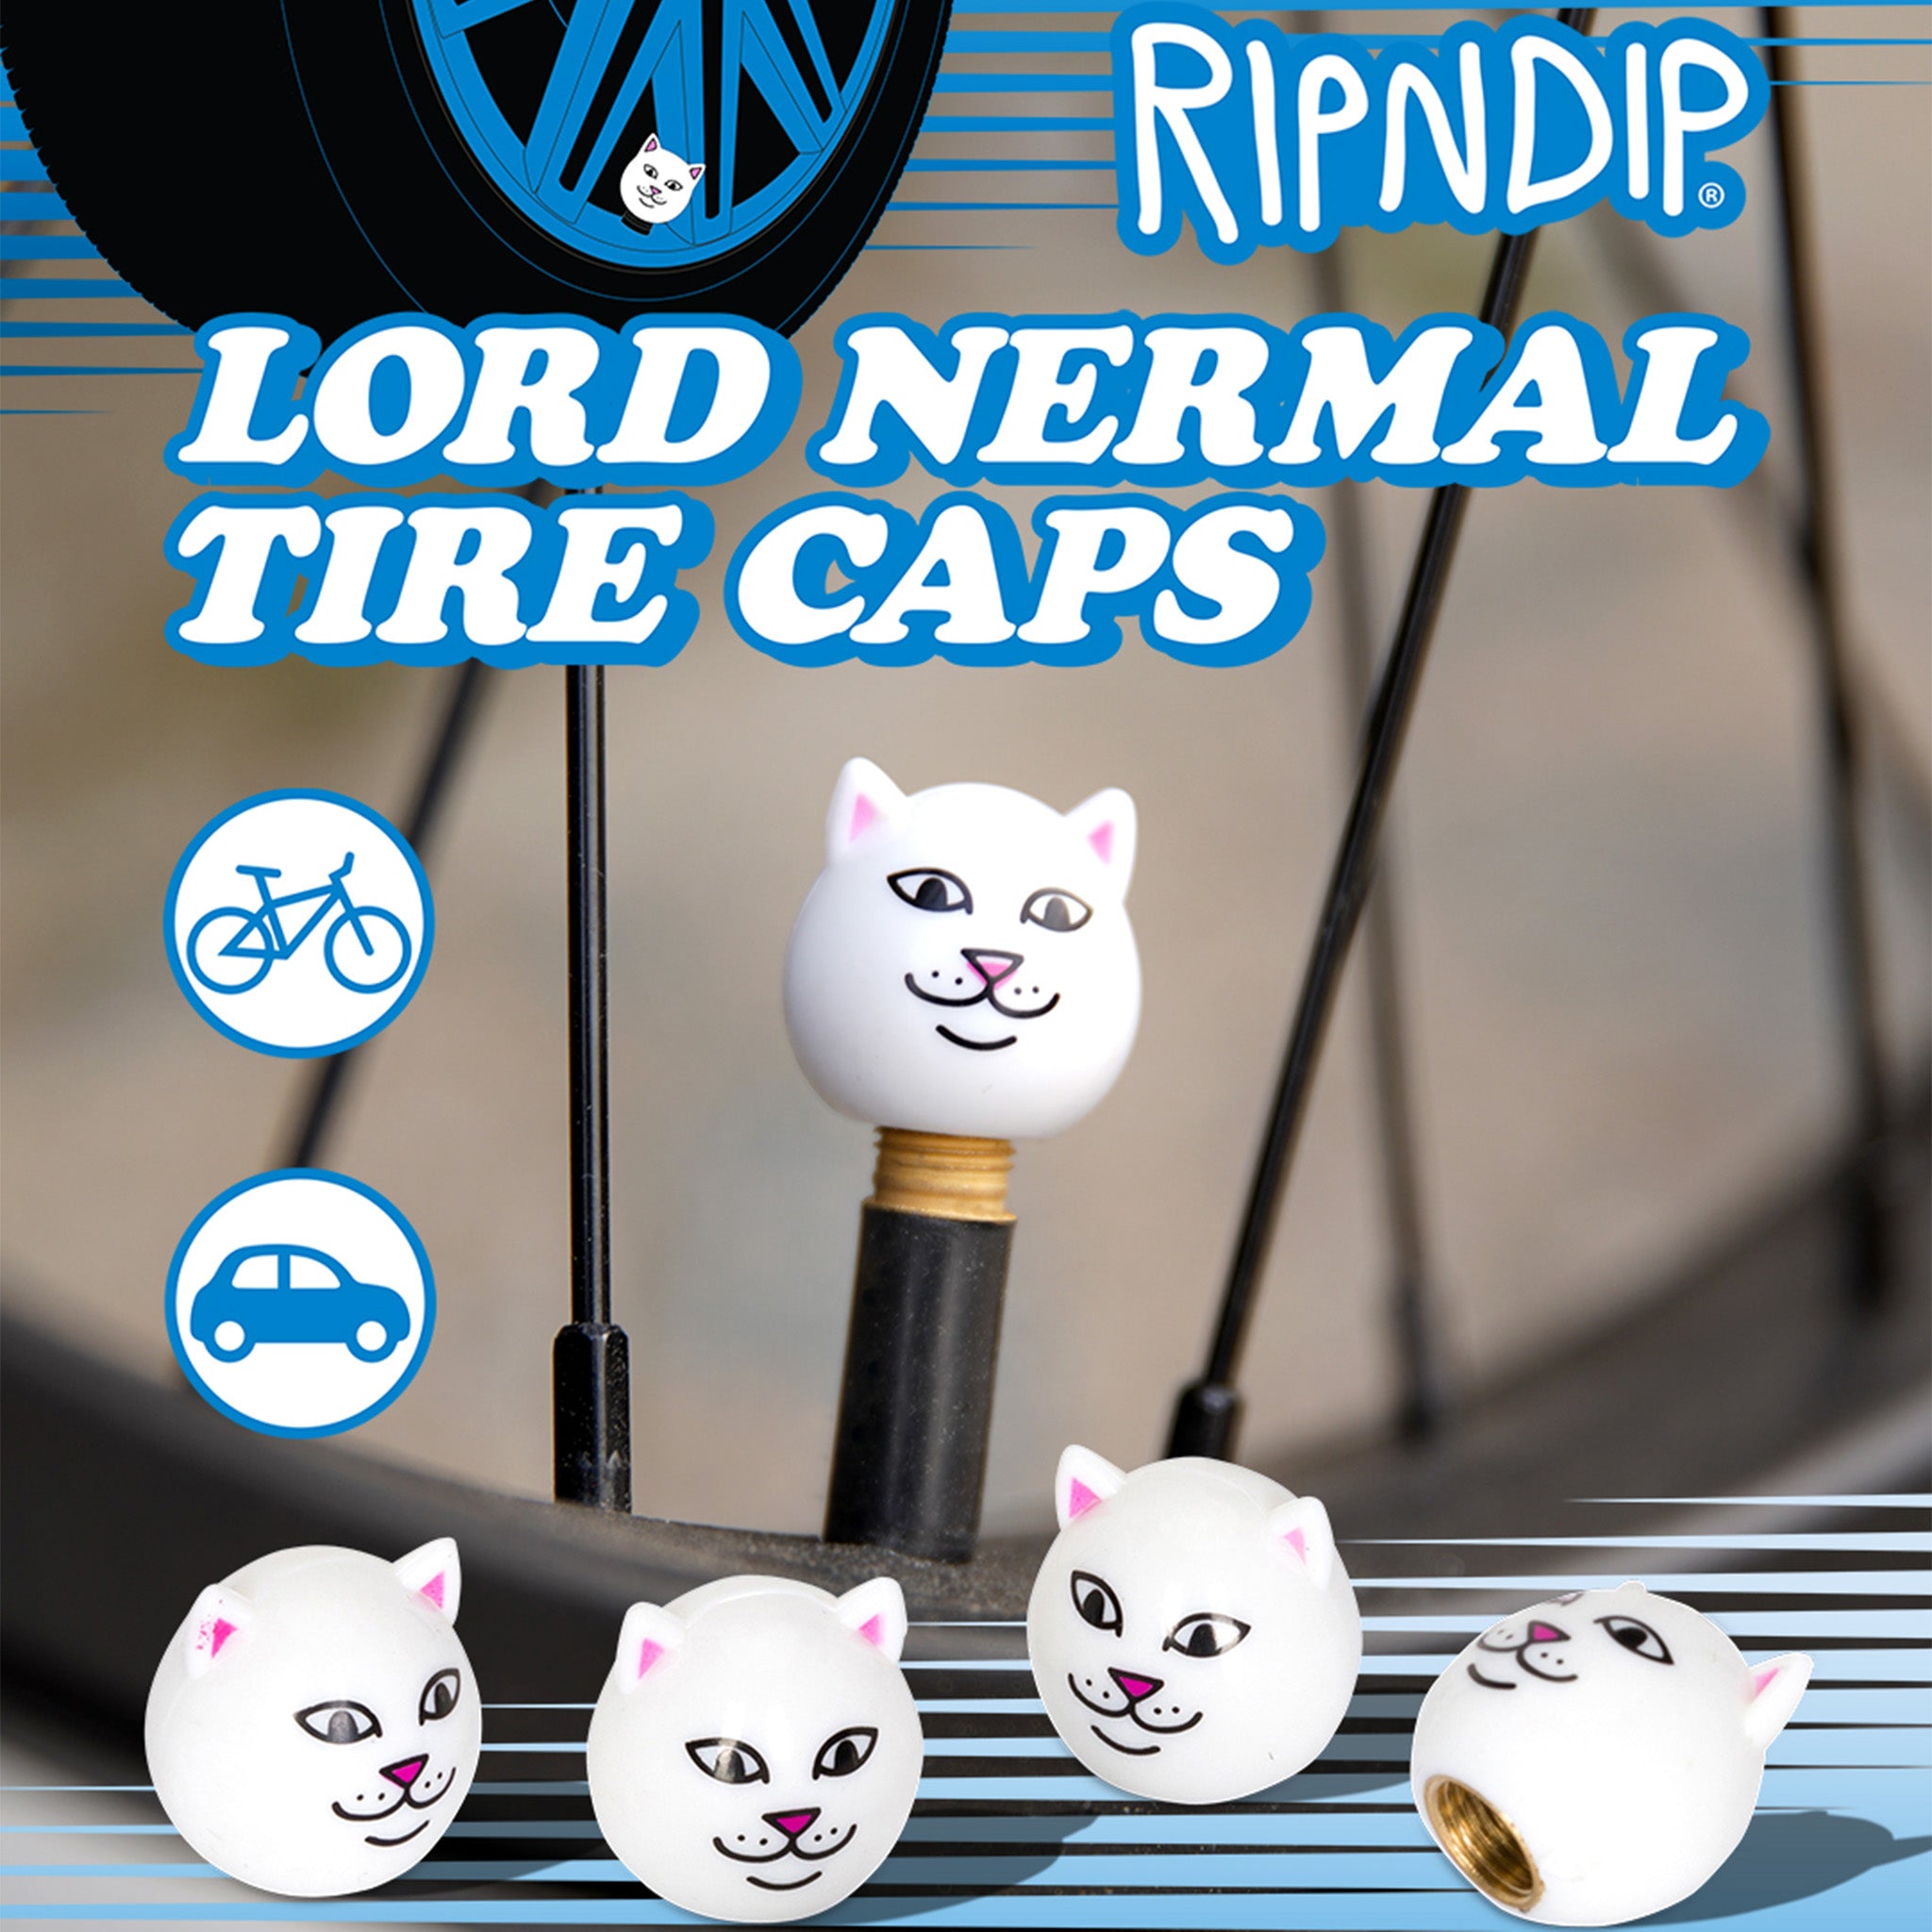 Lord Nermal Tire Caps (White)